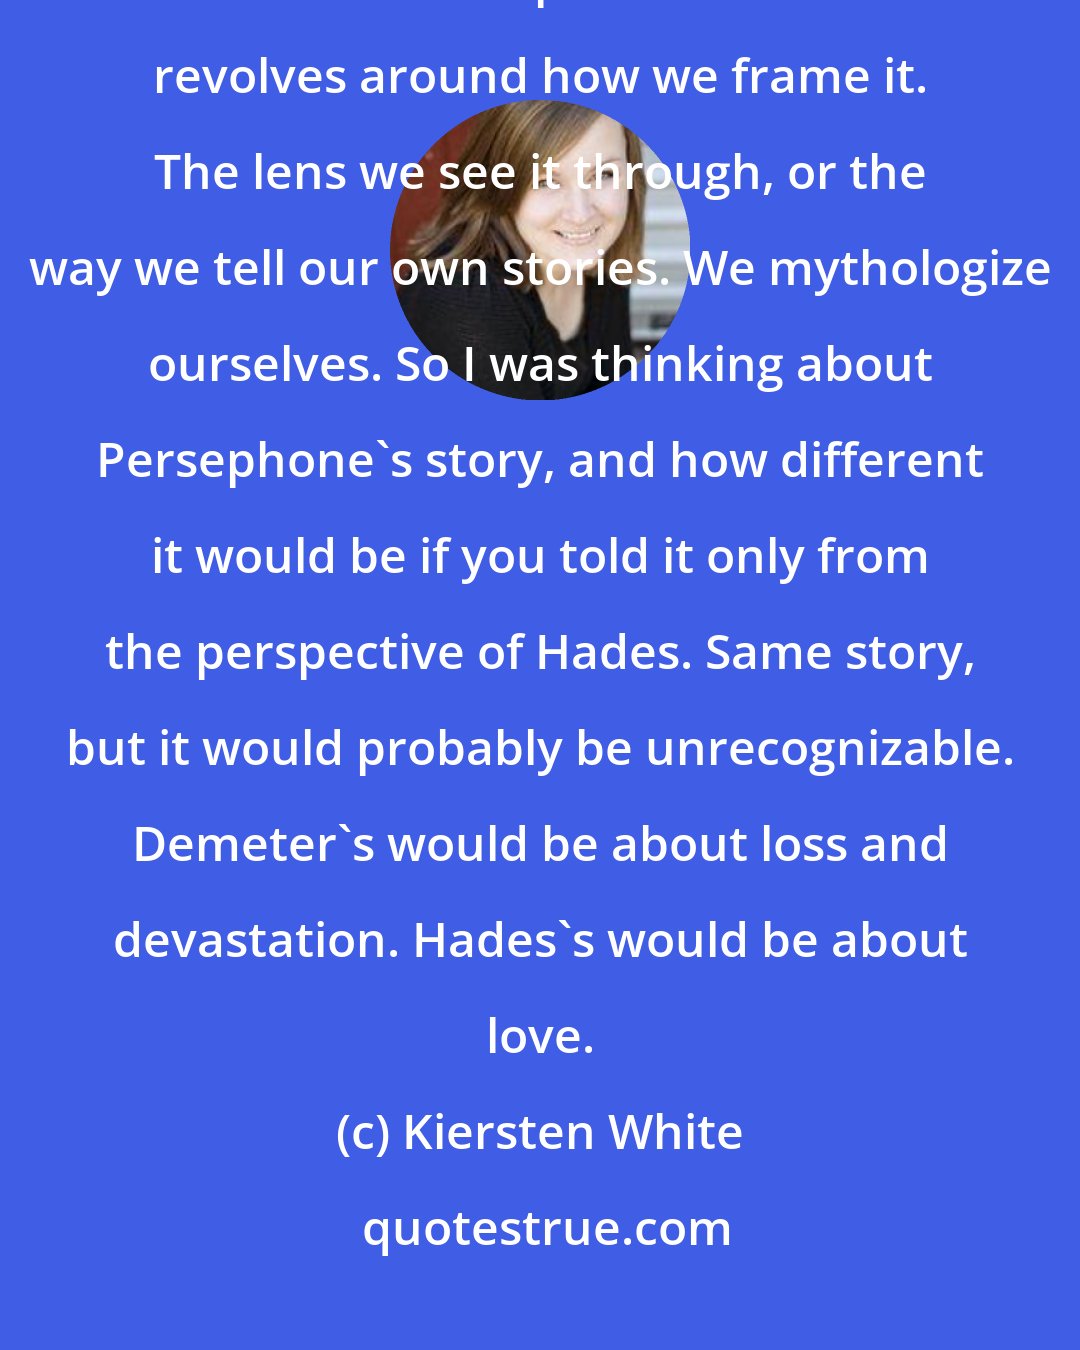 Kiersten White: I was thinking about framing, and how so much of what we think about our lives and our personal histories revolves around how we frame it. The lens we see it through, or the way we tell our own stories. We mythologize ourselves. So I was thinking about Persephone's story, and how different it would be if you told it only from the perspective of Hades. Same story, but it would probably be unrecognizable. Demeter's would be about loss and devastation. Hades's would be about love.